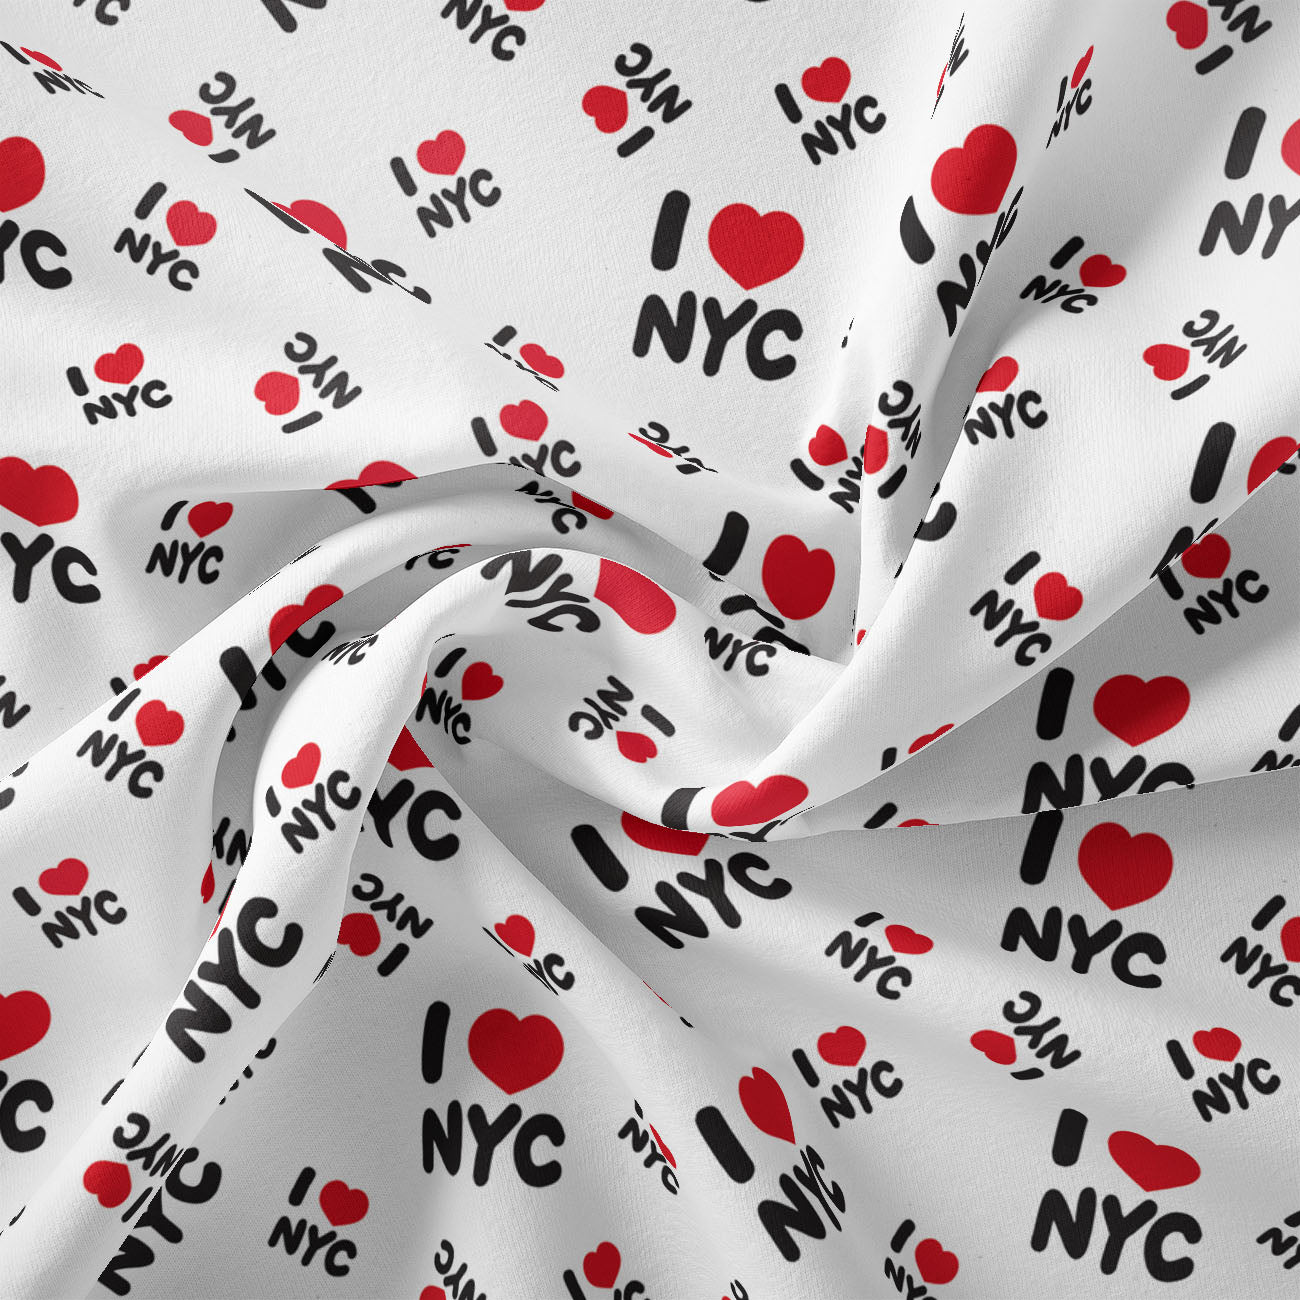 In a NY Minute Collection - I Heart NYC - White - Cotton 21220604-01